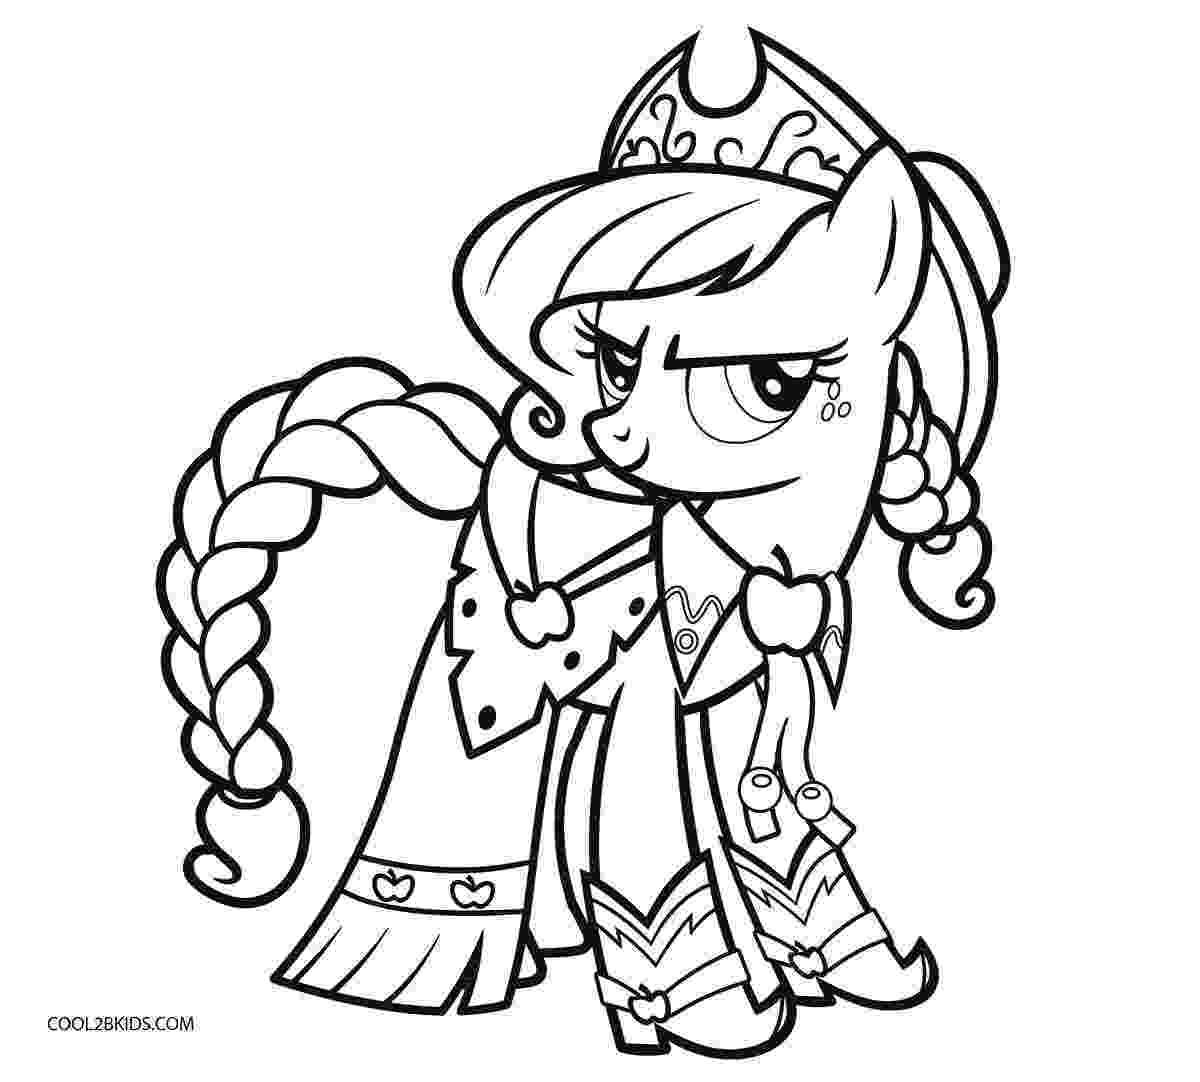 my little pony coloring sheets pony cartoon my little pony coloring page 003 unicorn pony sheets little coloring my 